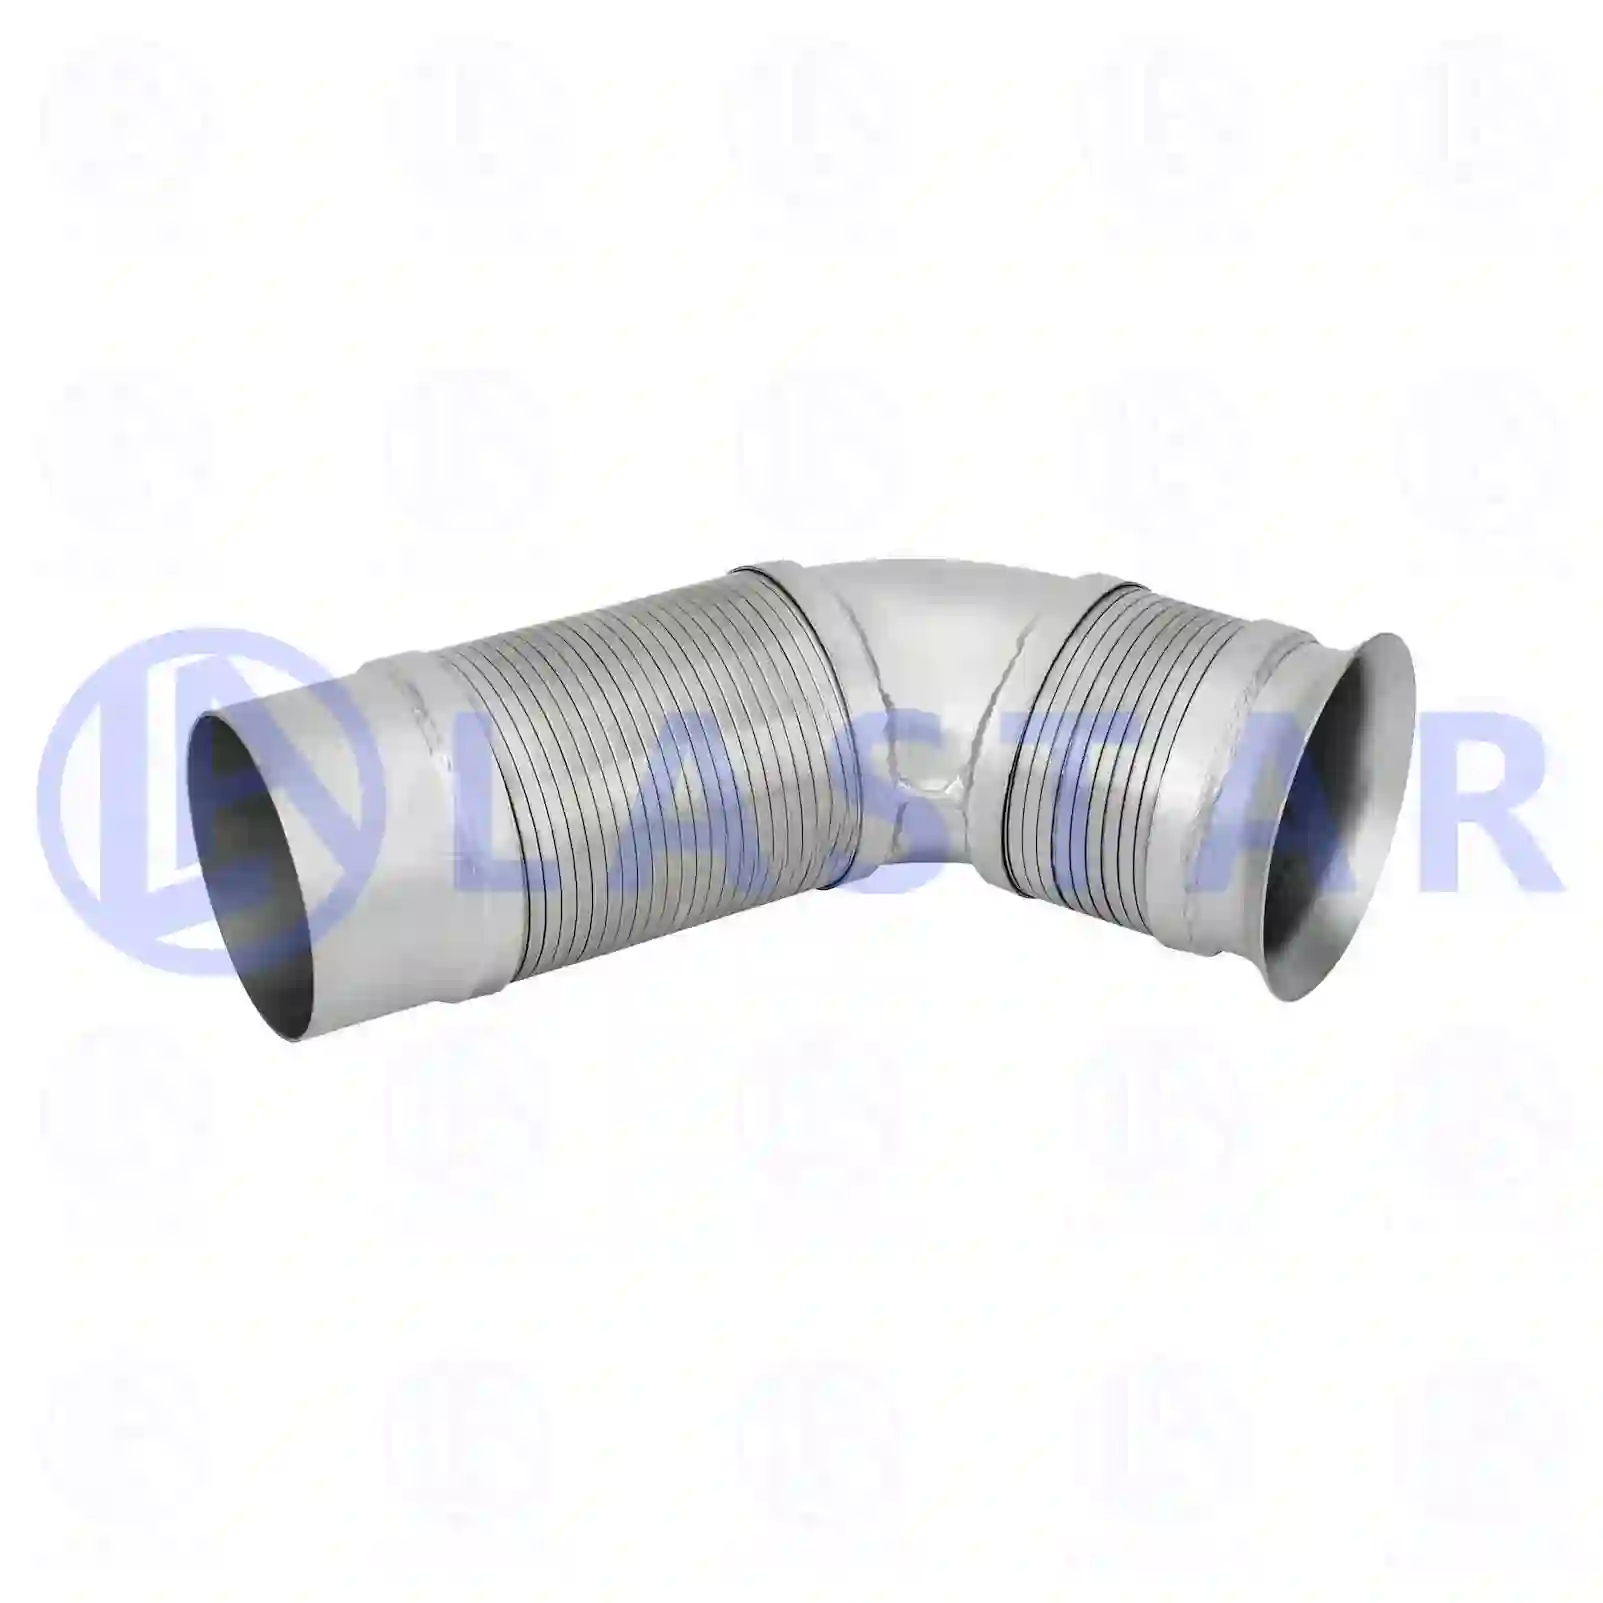 Exhaust pipe, 77706322, 9424901219, 9424902219, 9424904019 ||  77706322 Lastar Spare Part | Truck Spare Parts, Auotomotive Spare Parts Exhaust pipe, 77706322, 9424901219, 9424902219, 9424904019 ||  77706322 Lastar Spare Part | Truck Spare Parts, Auotomotive Spare Parts